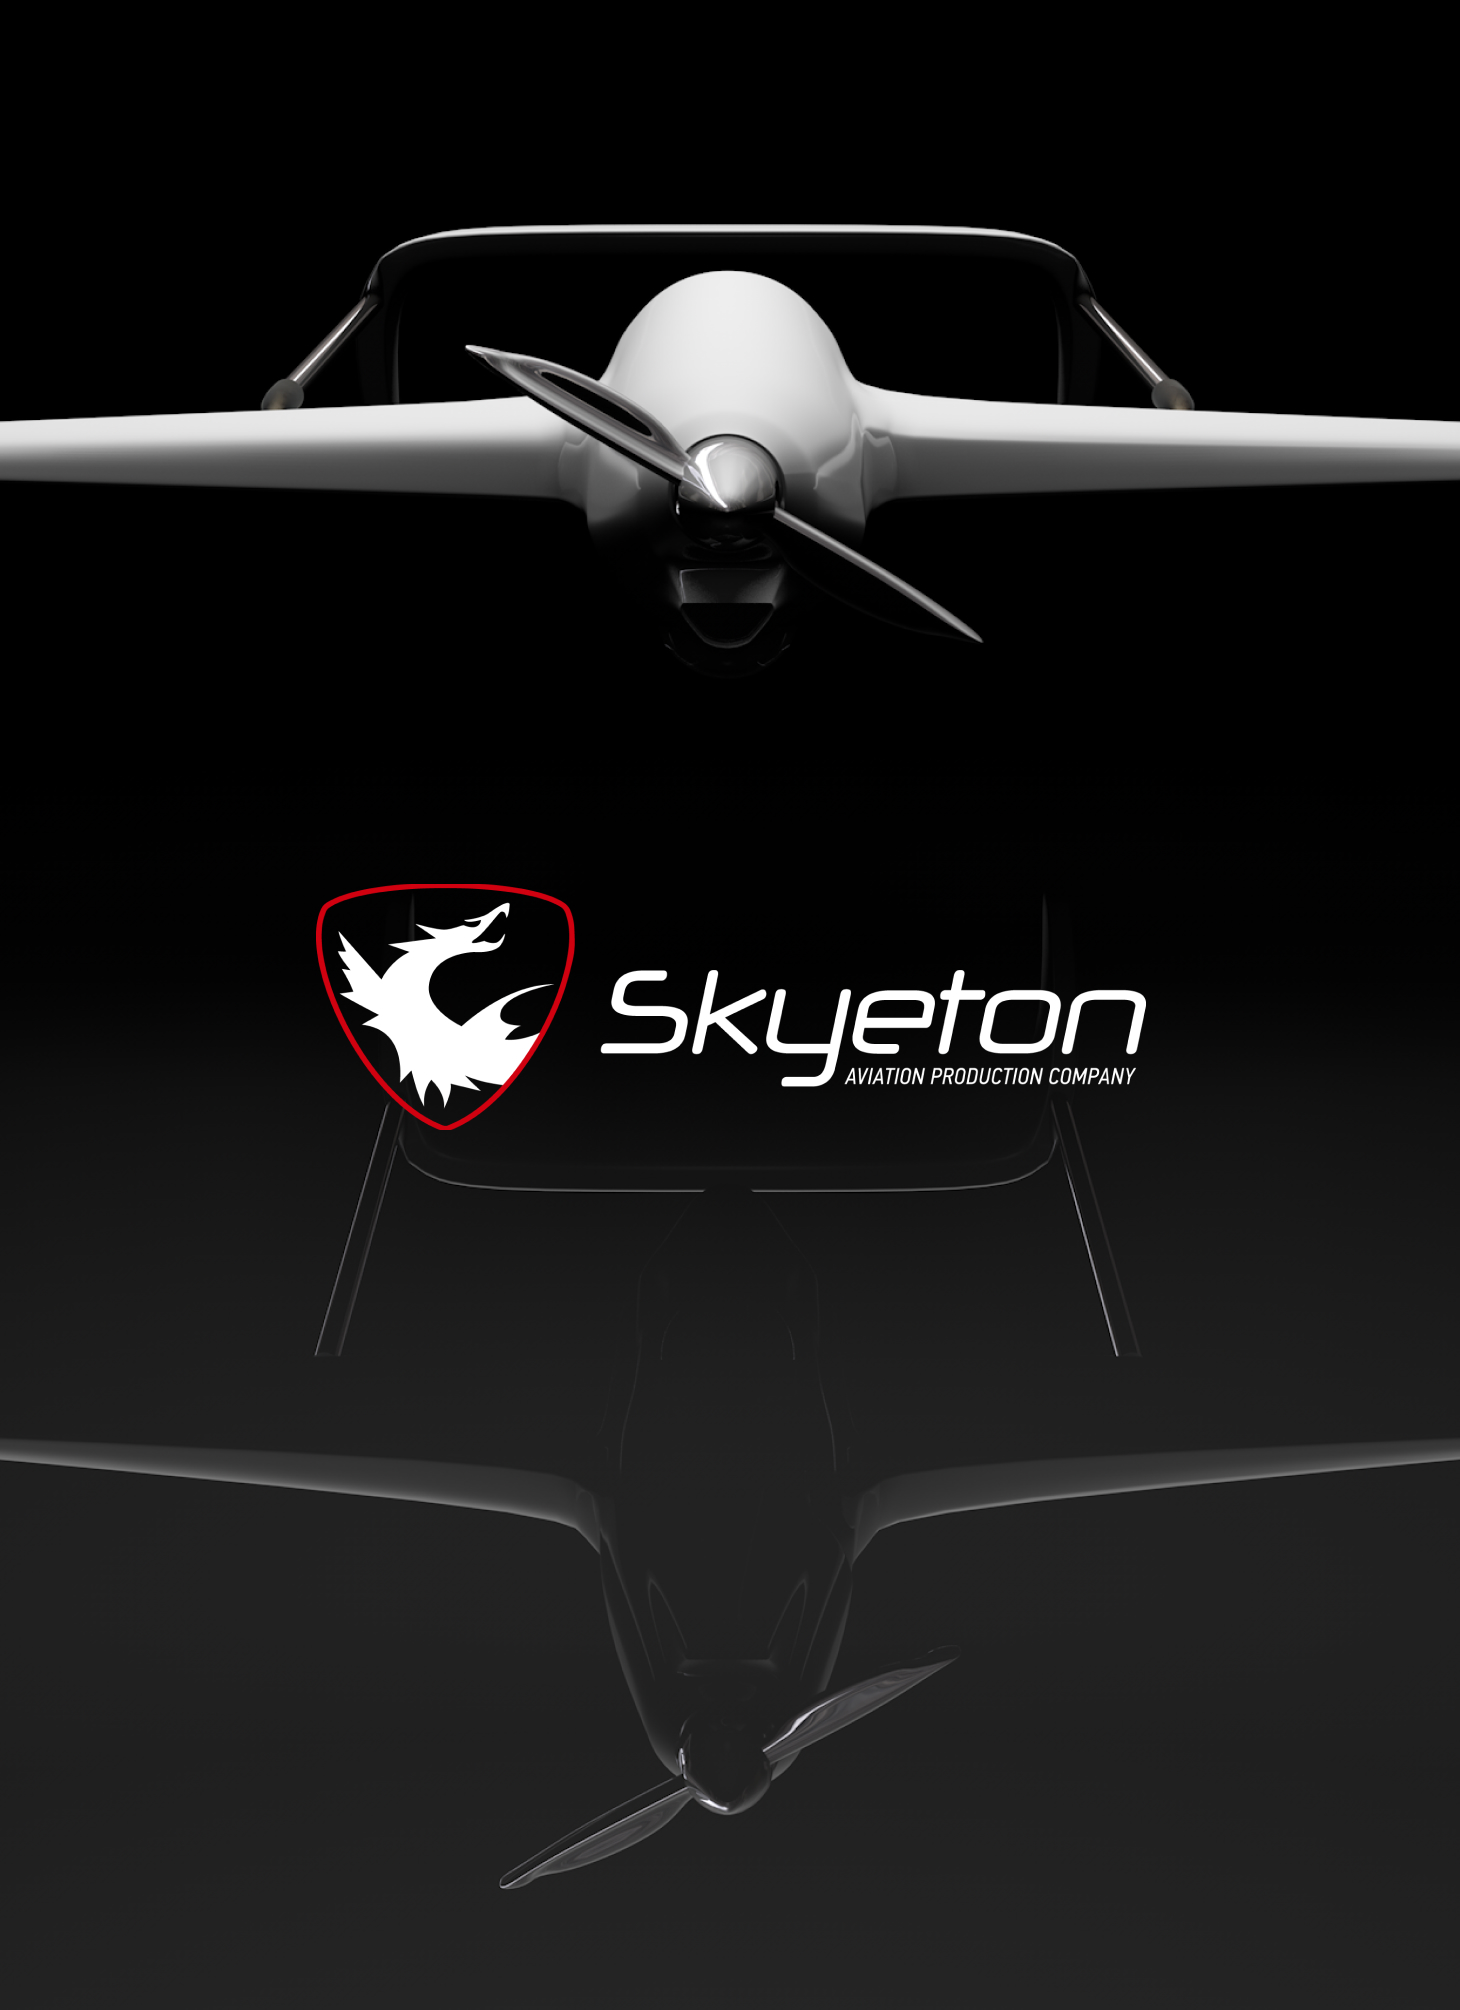 Skyeton UAV is a leading provider of cutting-edge drone technology for a wide range of industries